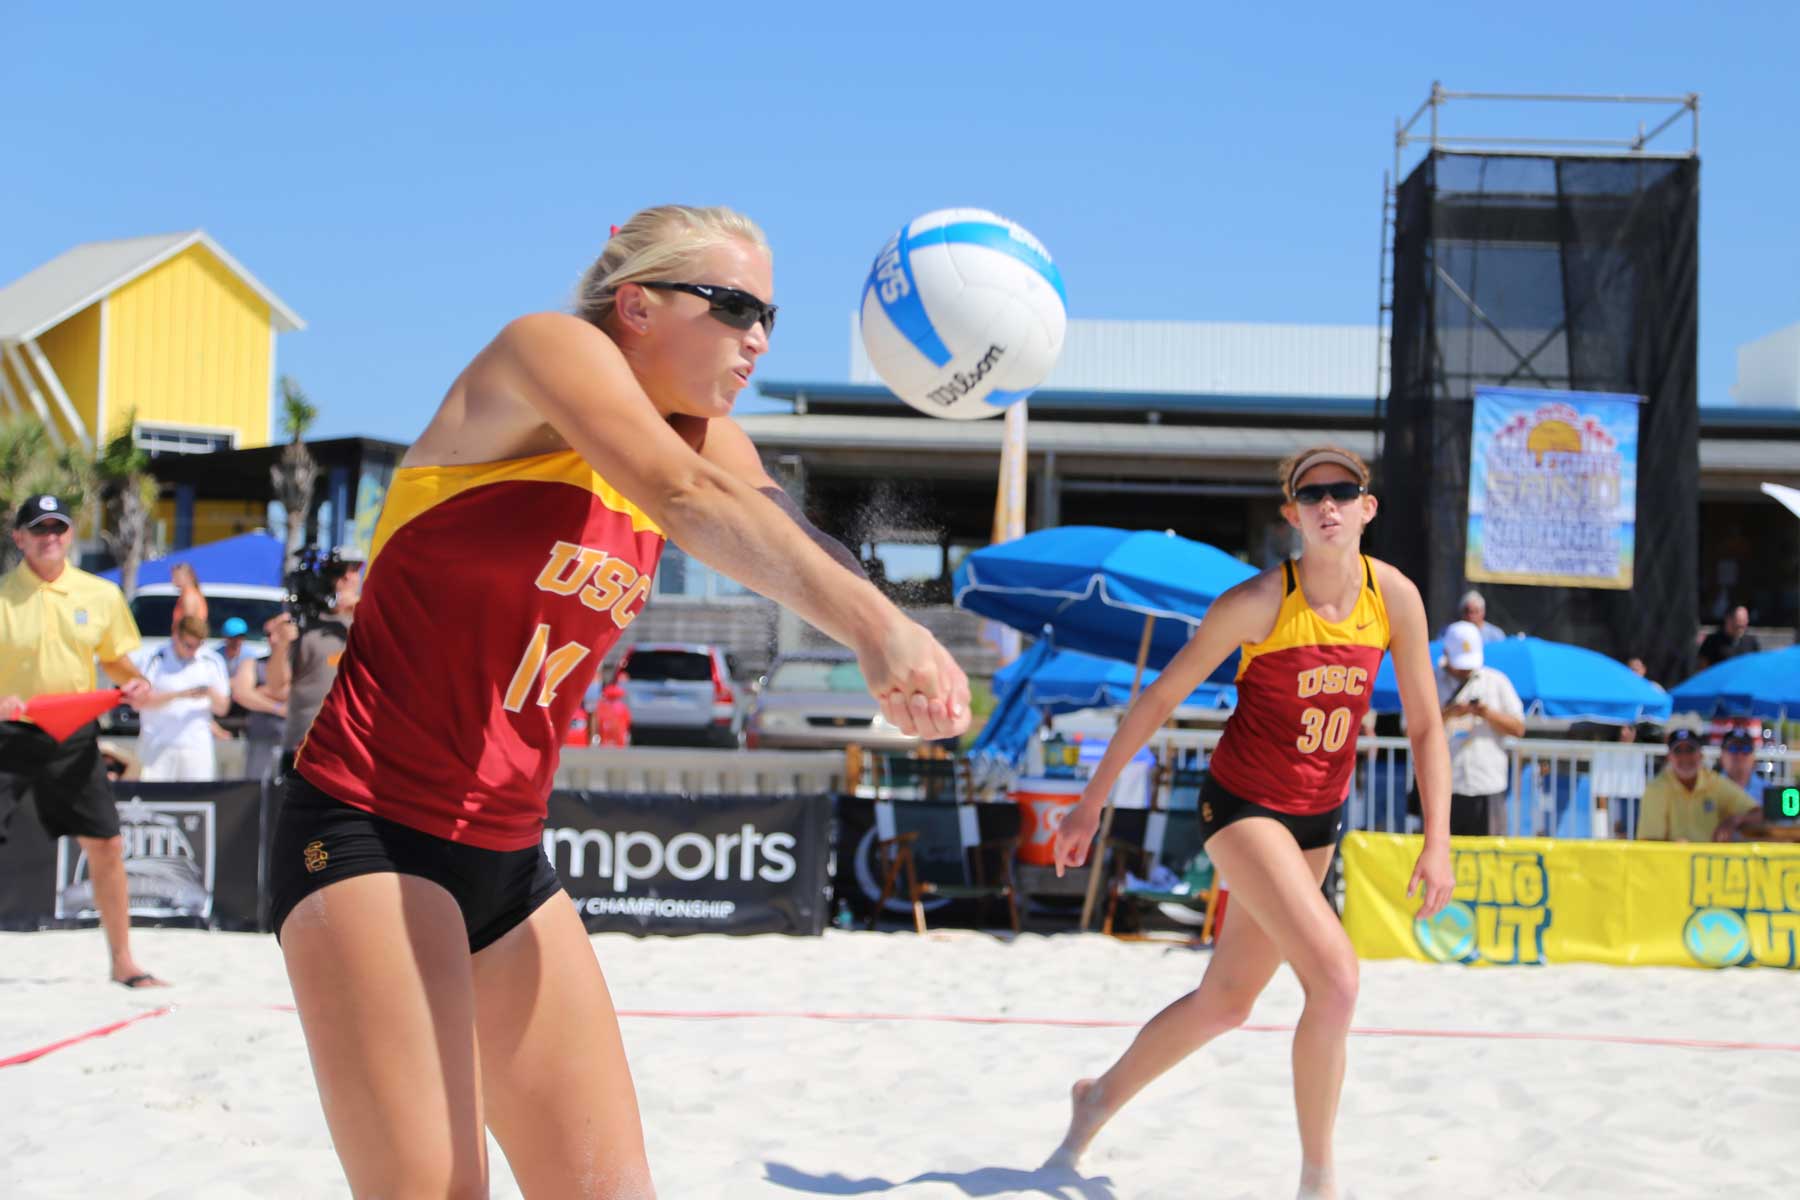 USC women’s beach volleyball players Sara Hughes and Kelly Claes